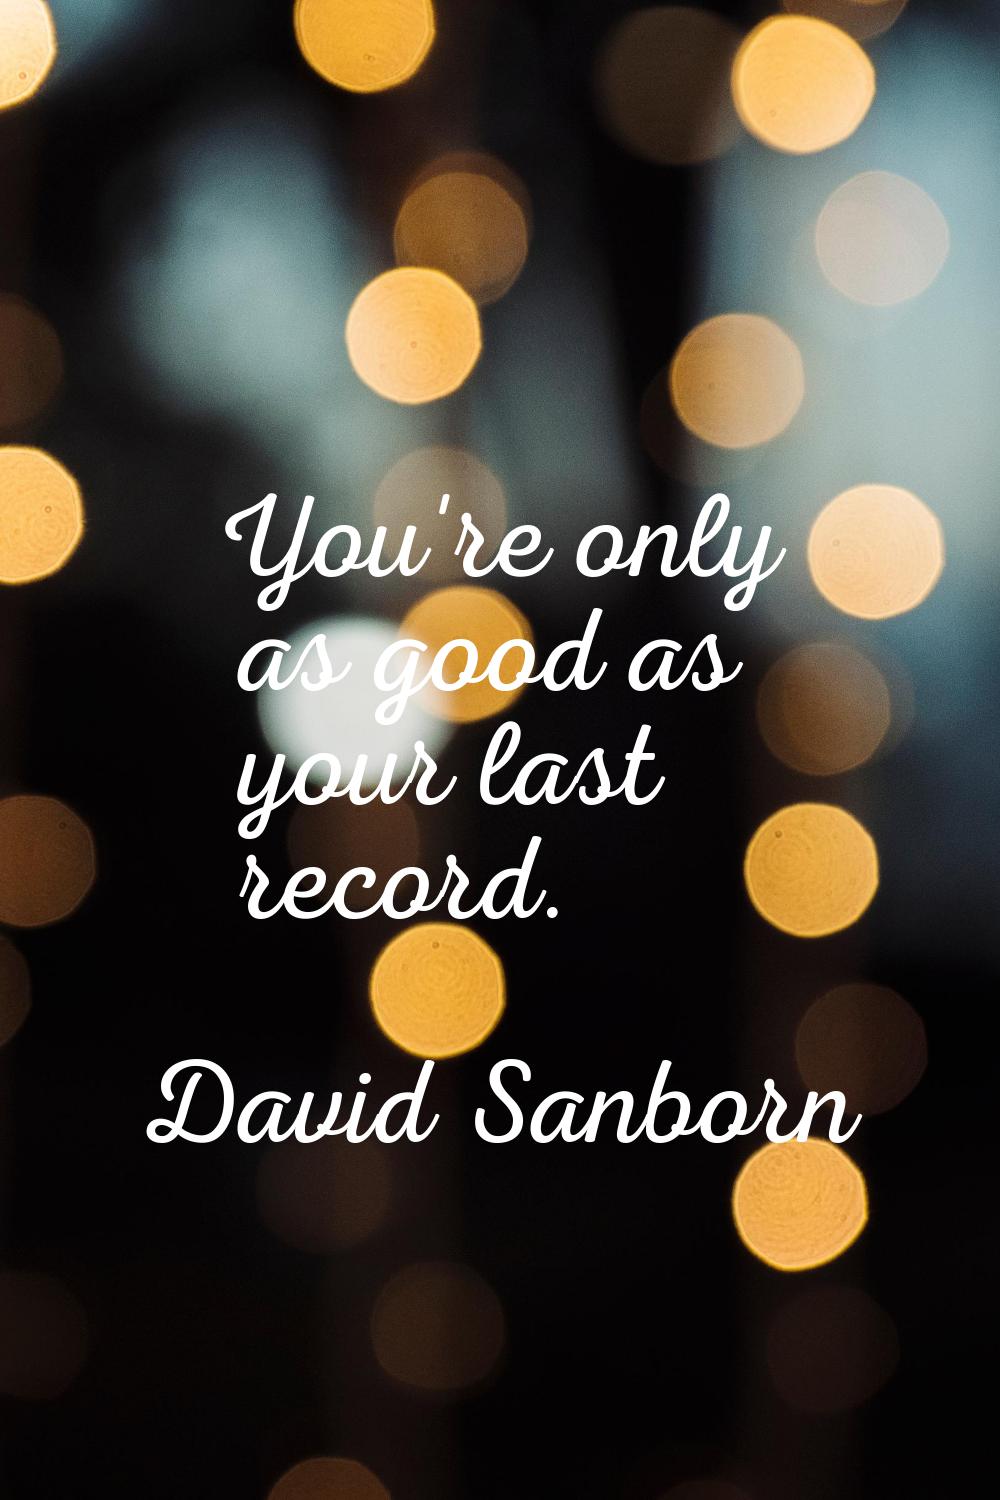 You're only as good as your last record.